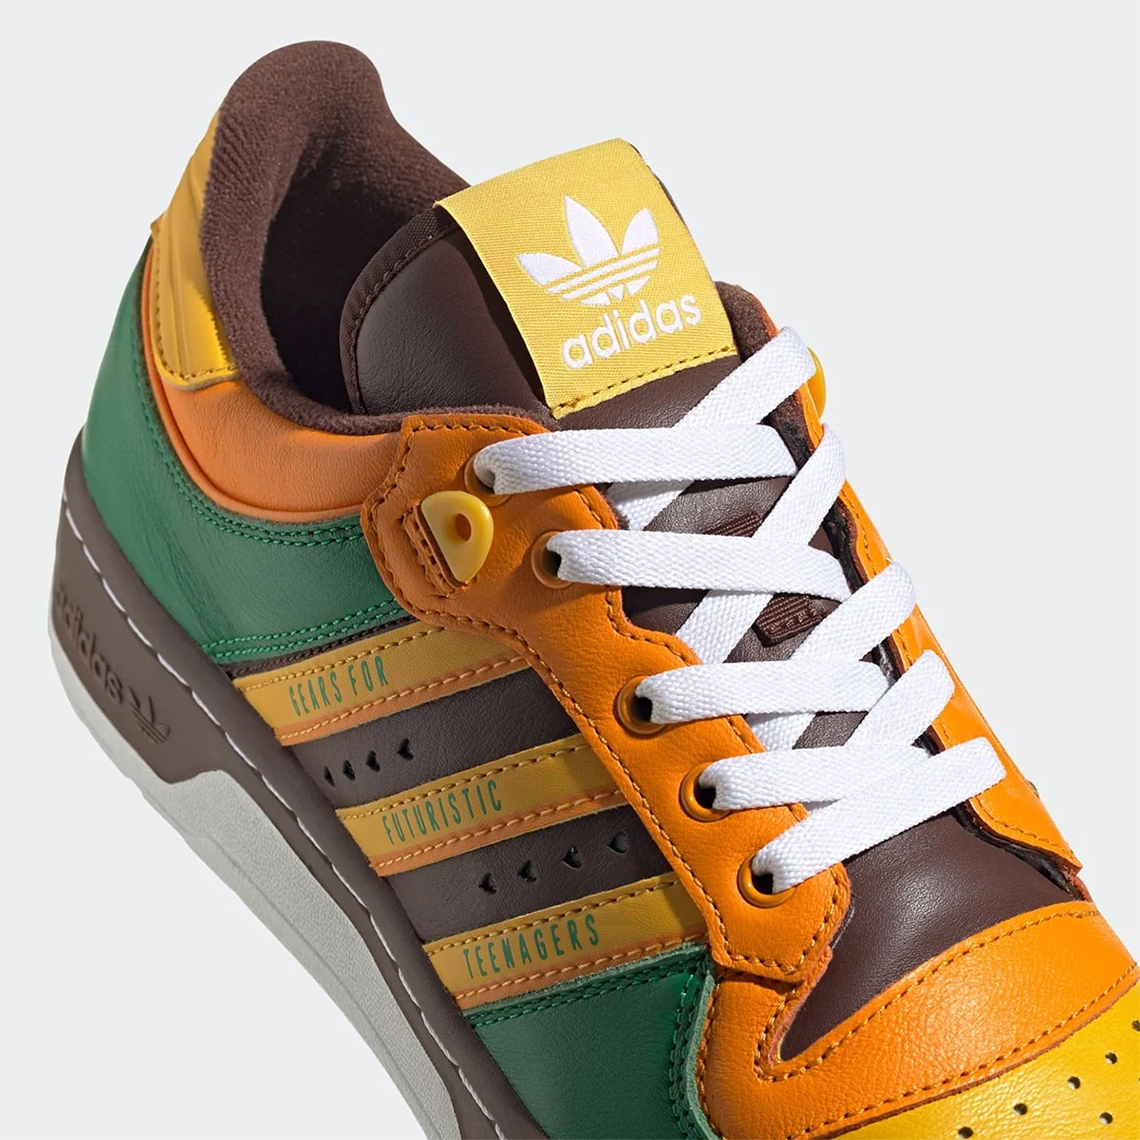 Human Made Adiads Rivalry Low Green Yellow Fy1084 6